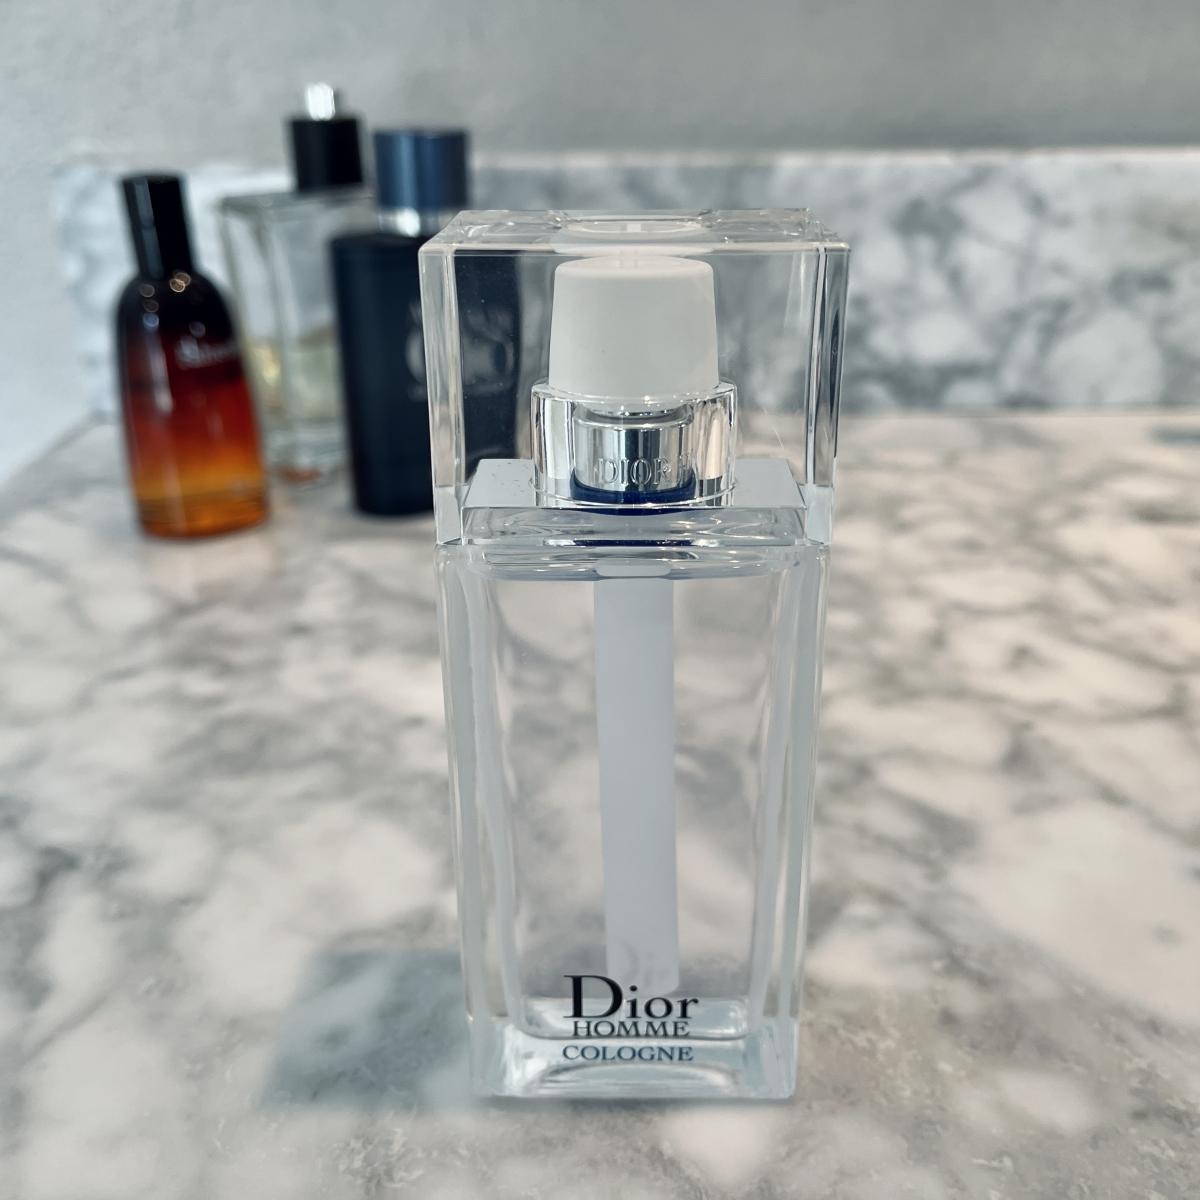 Dior Homme Cologne 75ml Perfume Beauty  Personal Care Fragrance   Deodorants on Carousell